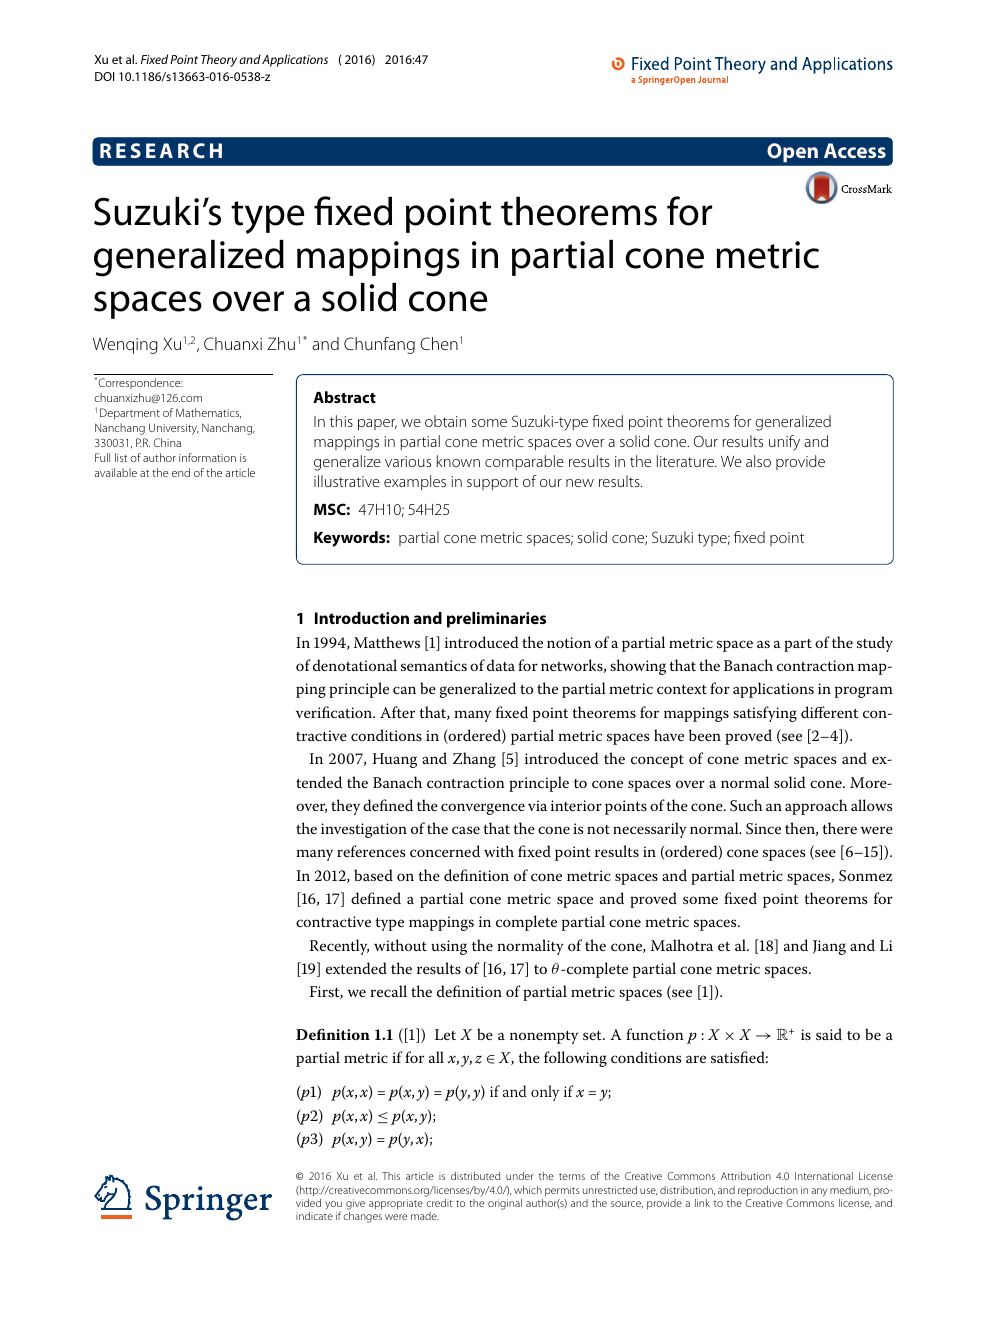 Suzuki S Type Fixed Point Theorems For Generalized Mappings In Partial Cone Metric Spaces Over A Solid Cone Topic Of Research Paper In Mathematics Download Scholarly Article Pdf And Read For Free